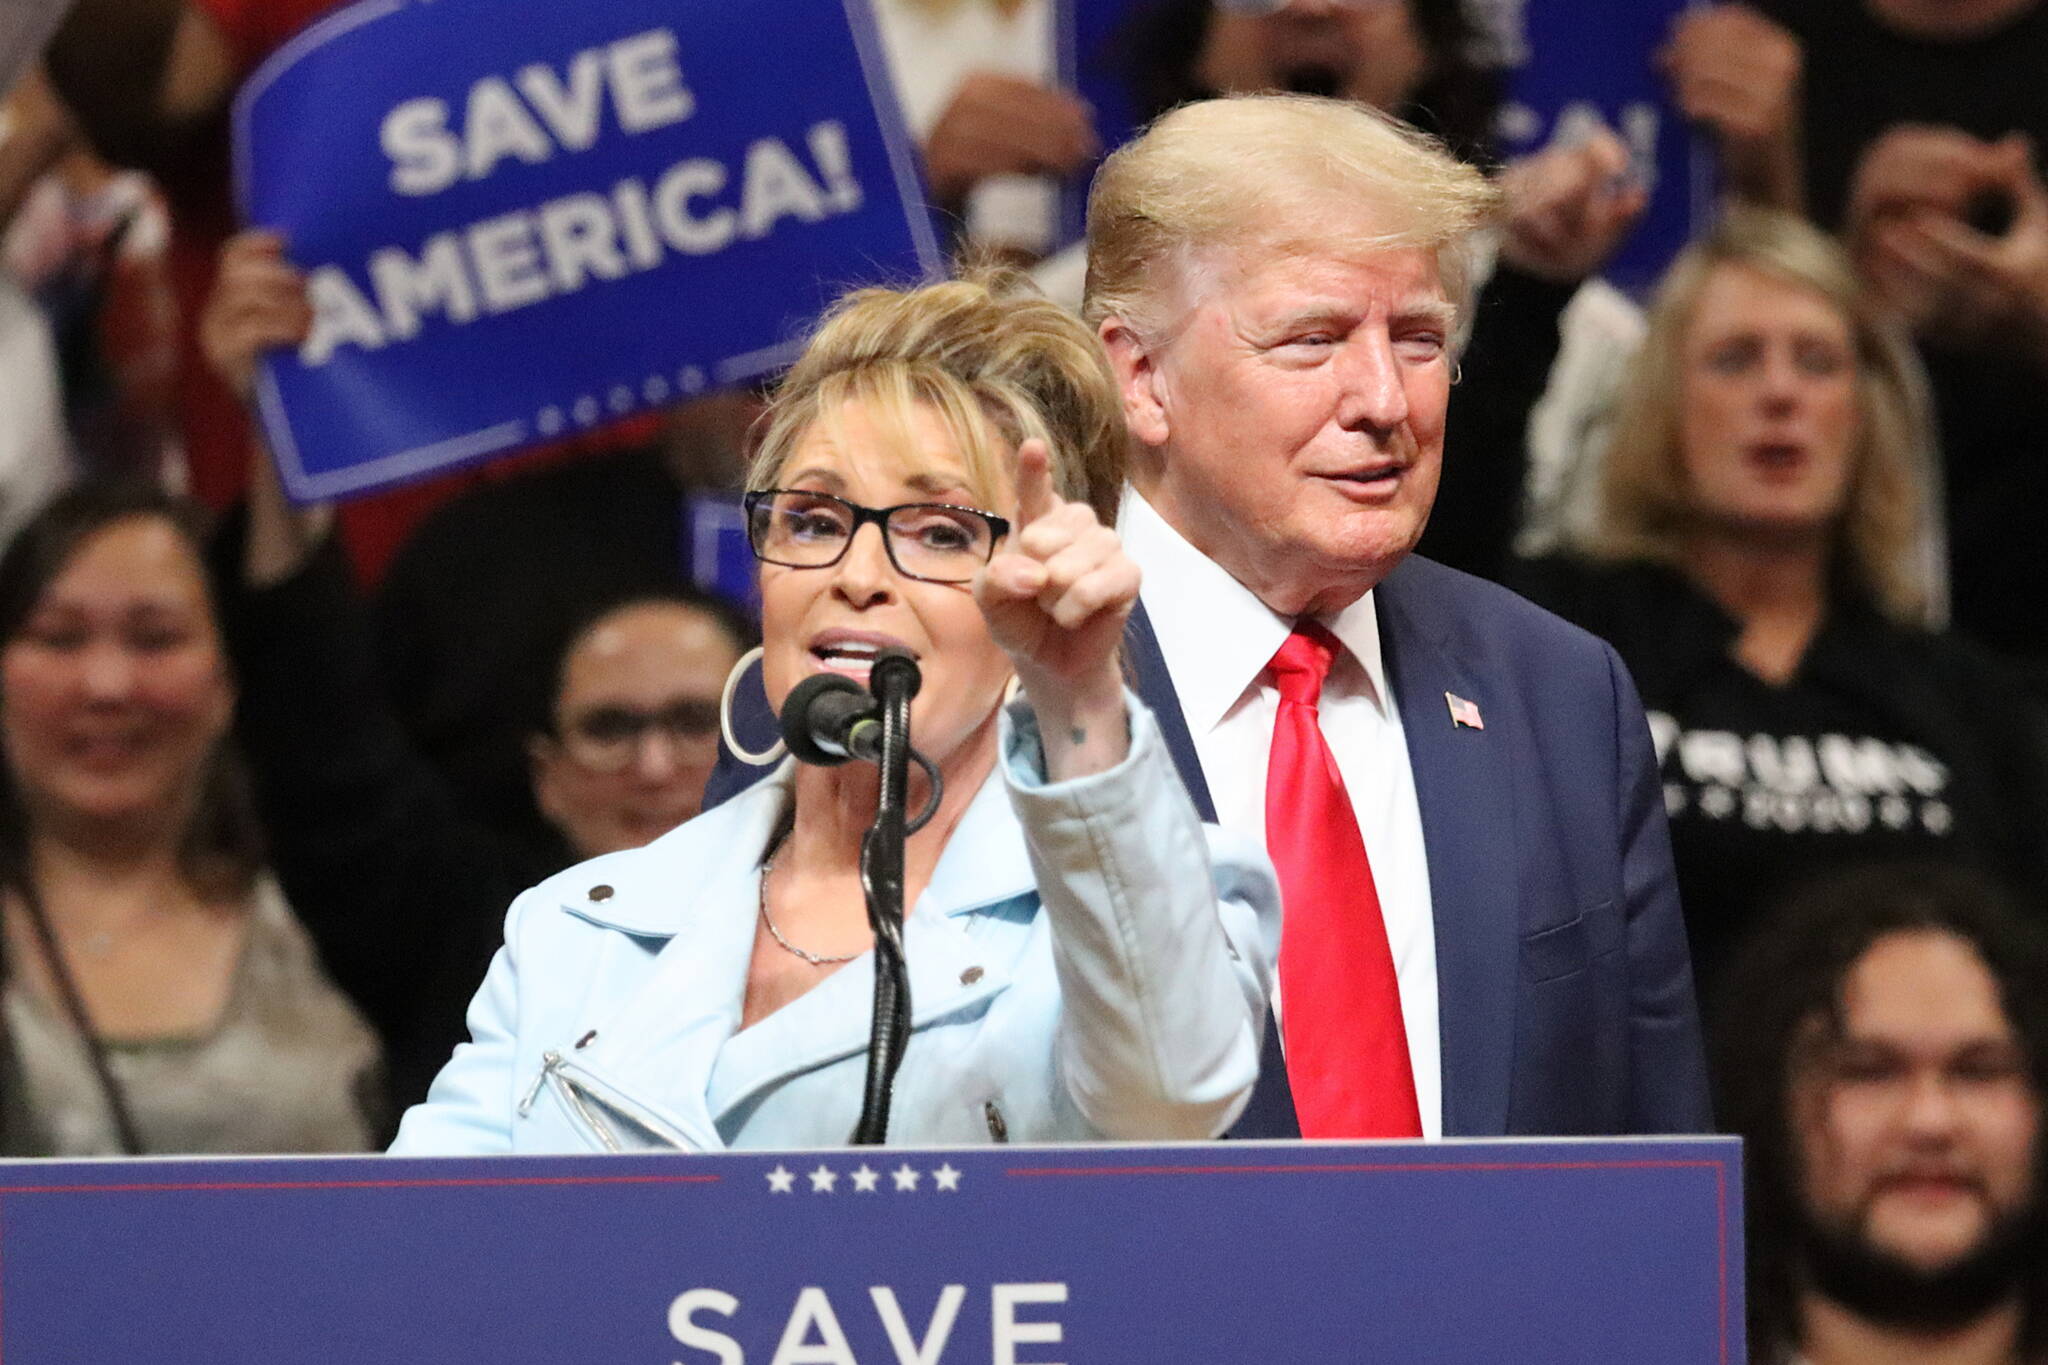 This July 9 photo shows former Gov. Sarah Palin and former President Donald Trump at a rally held in Anchorage. (Mark Sabbatini / Juneau Empire File)